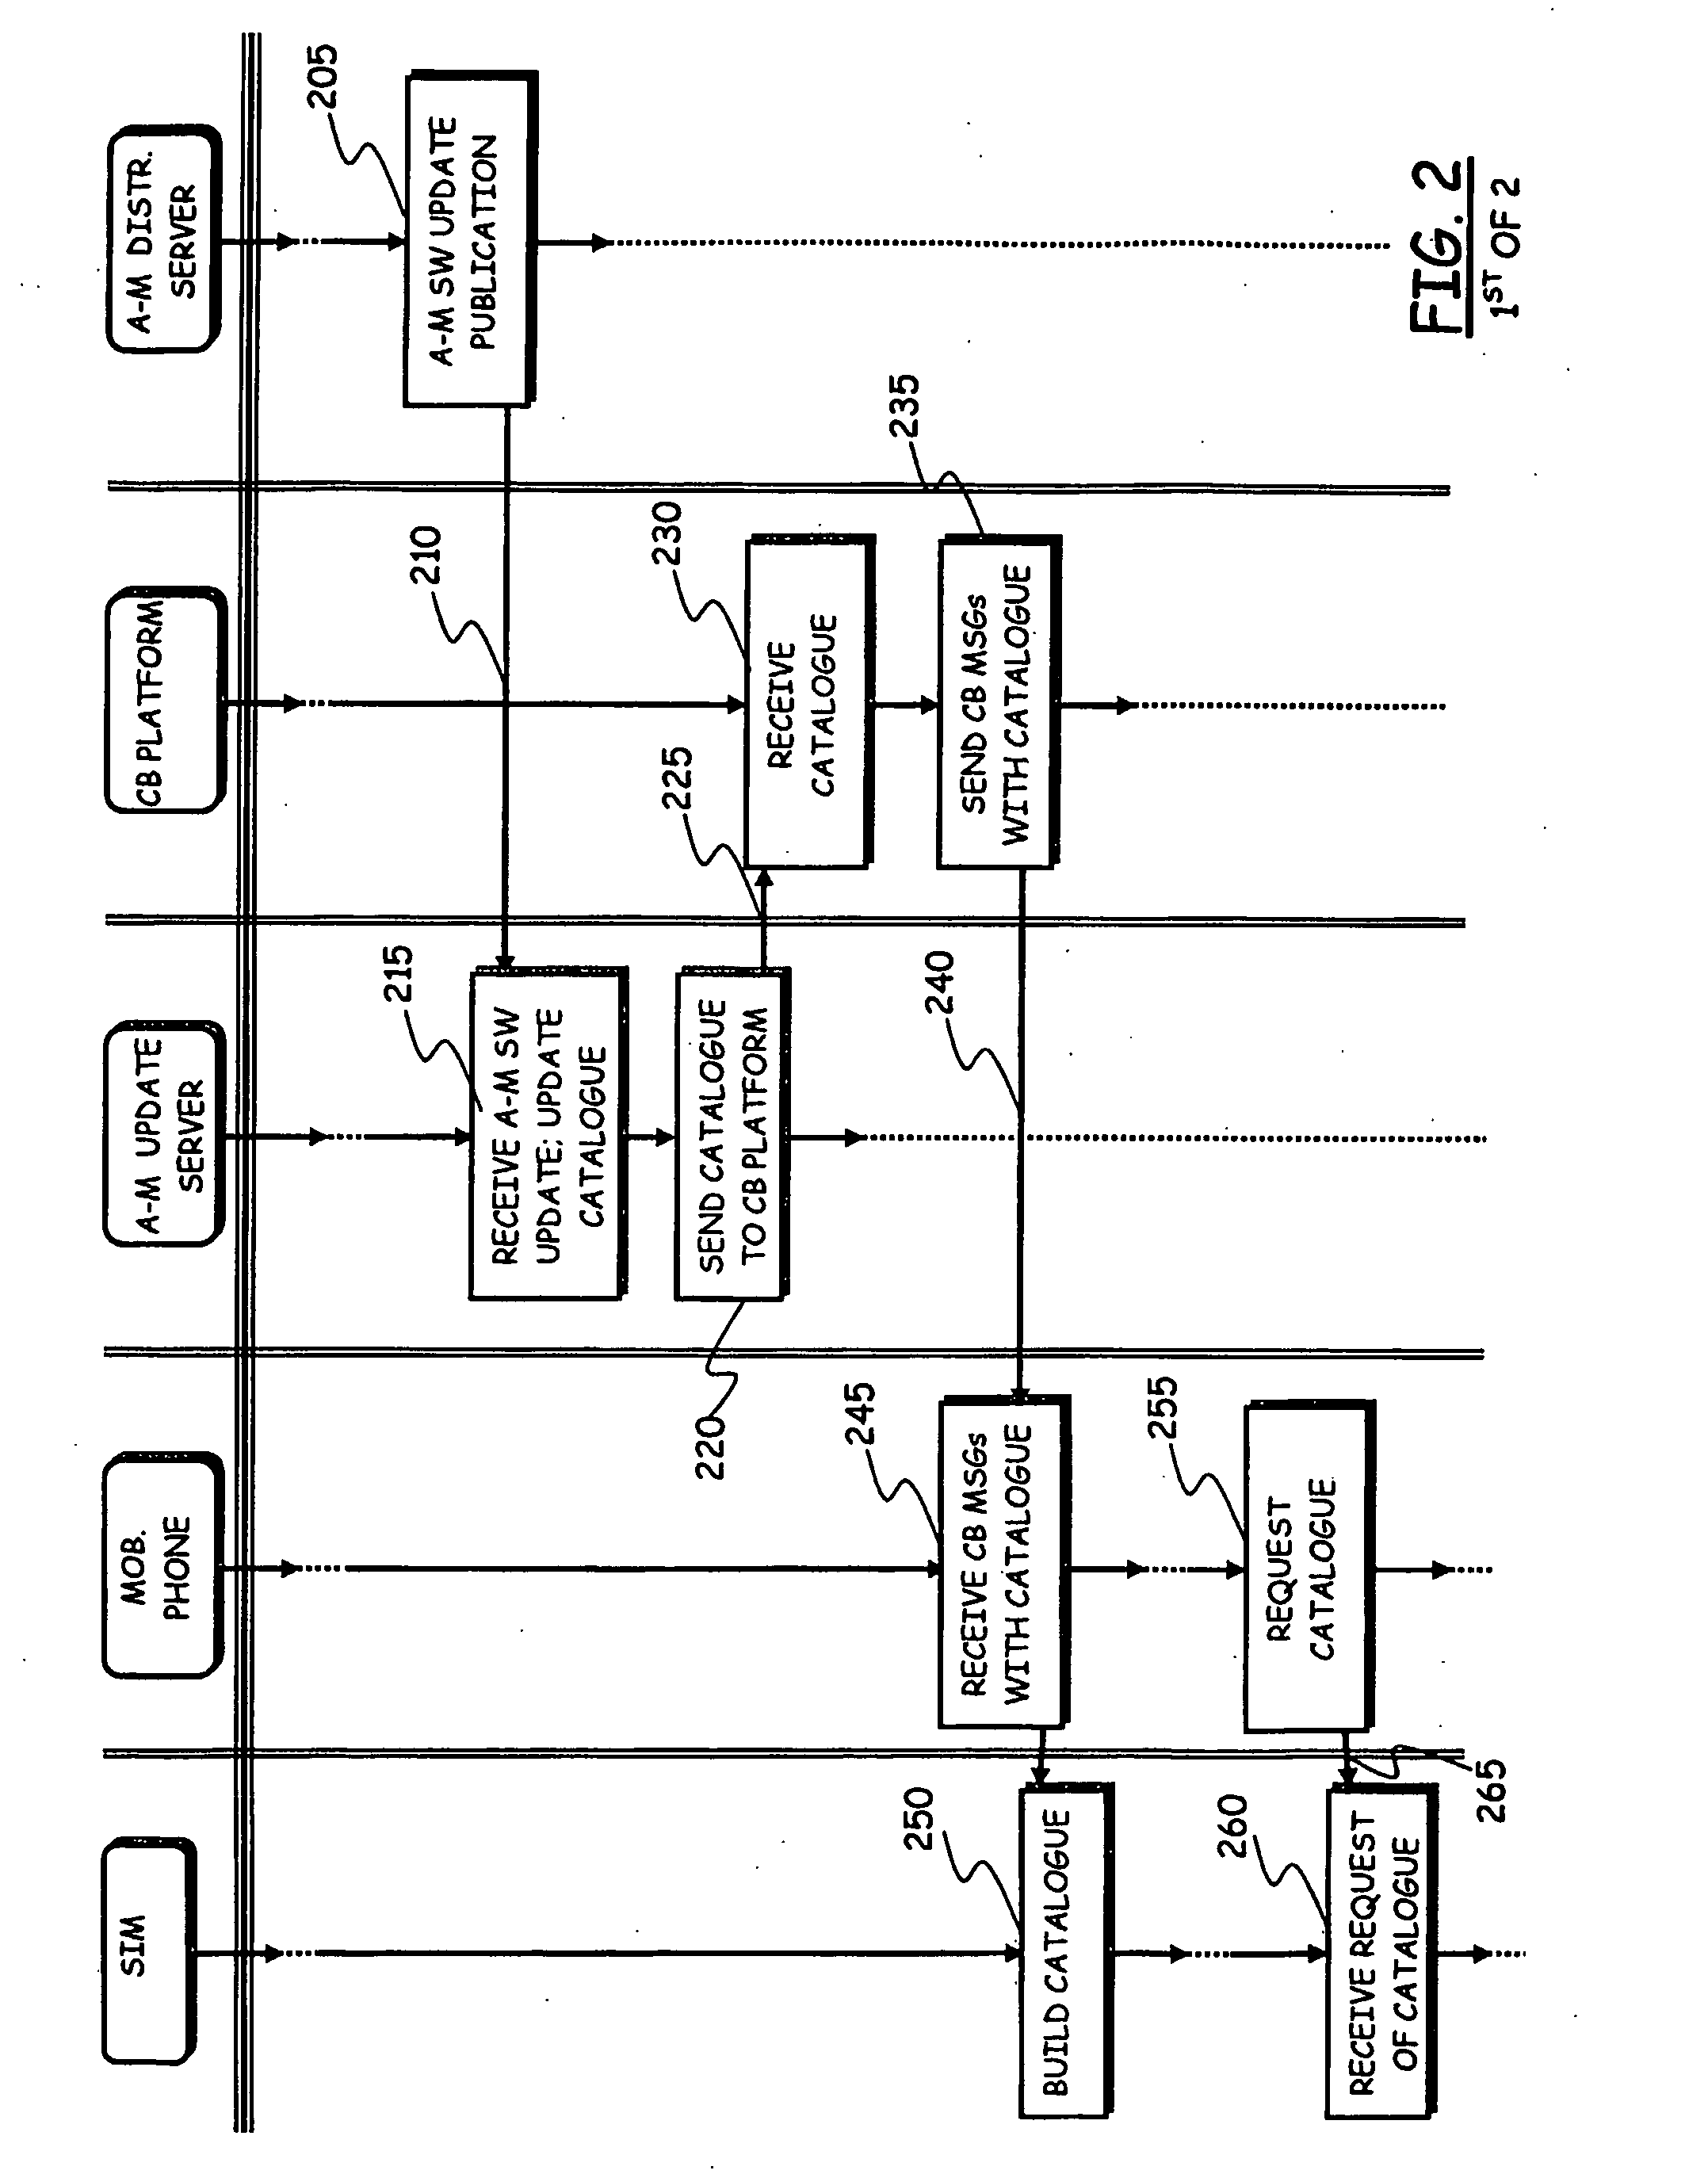 Method and System for Updating Applications in Mobile Communications Terminals